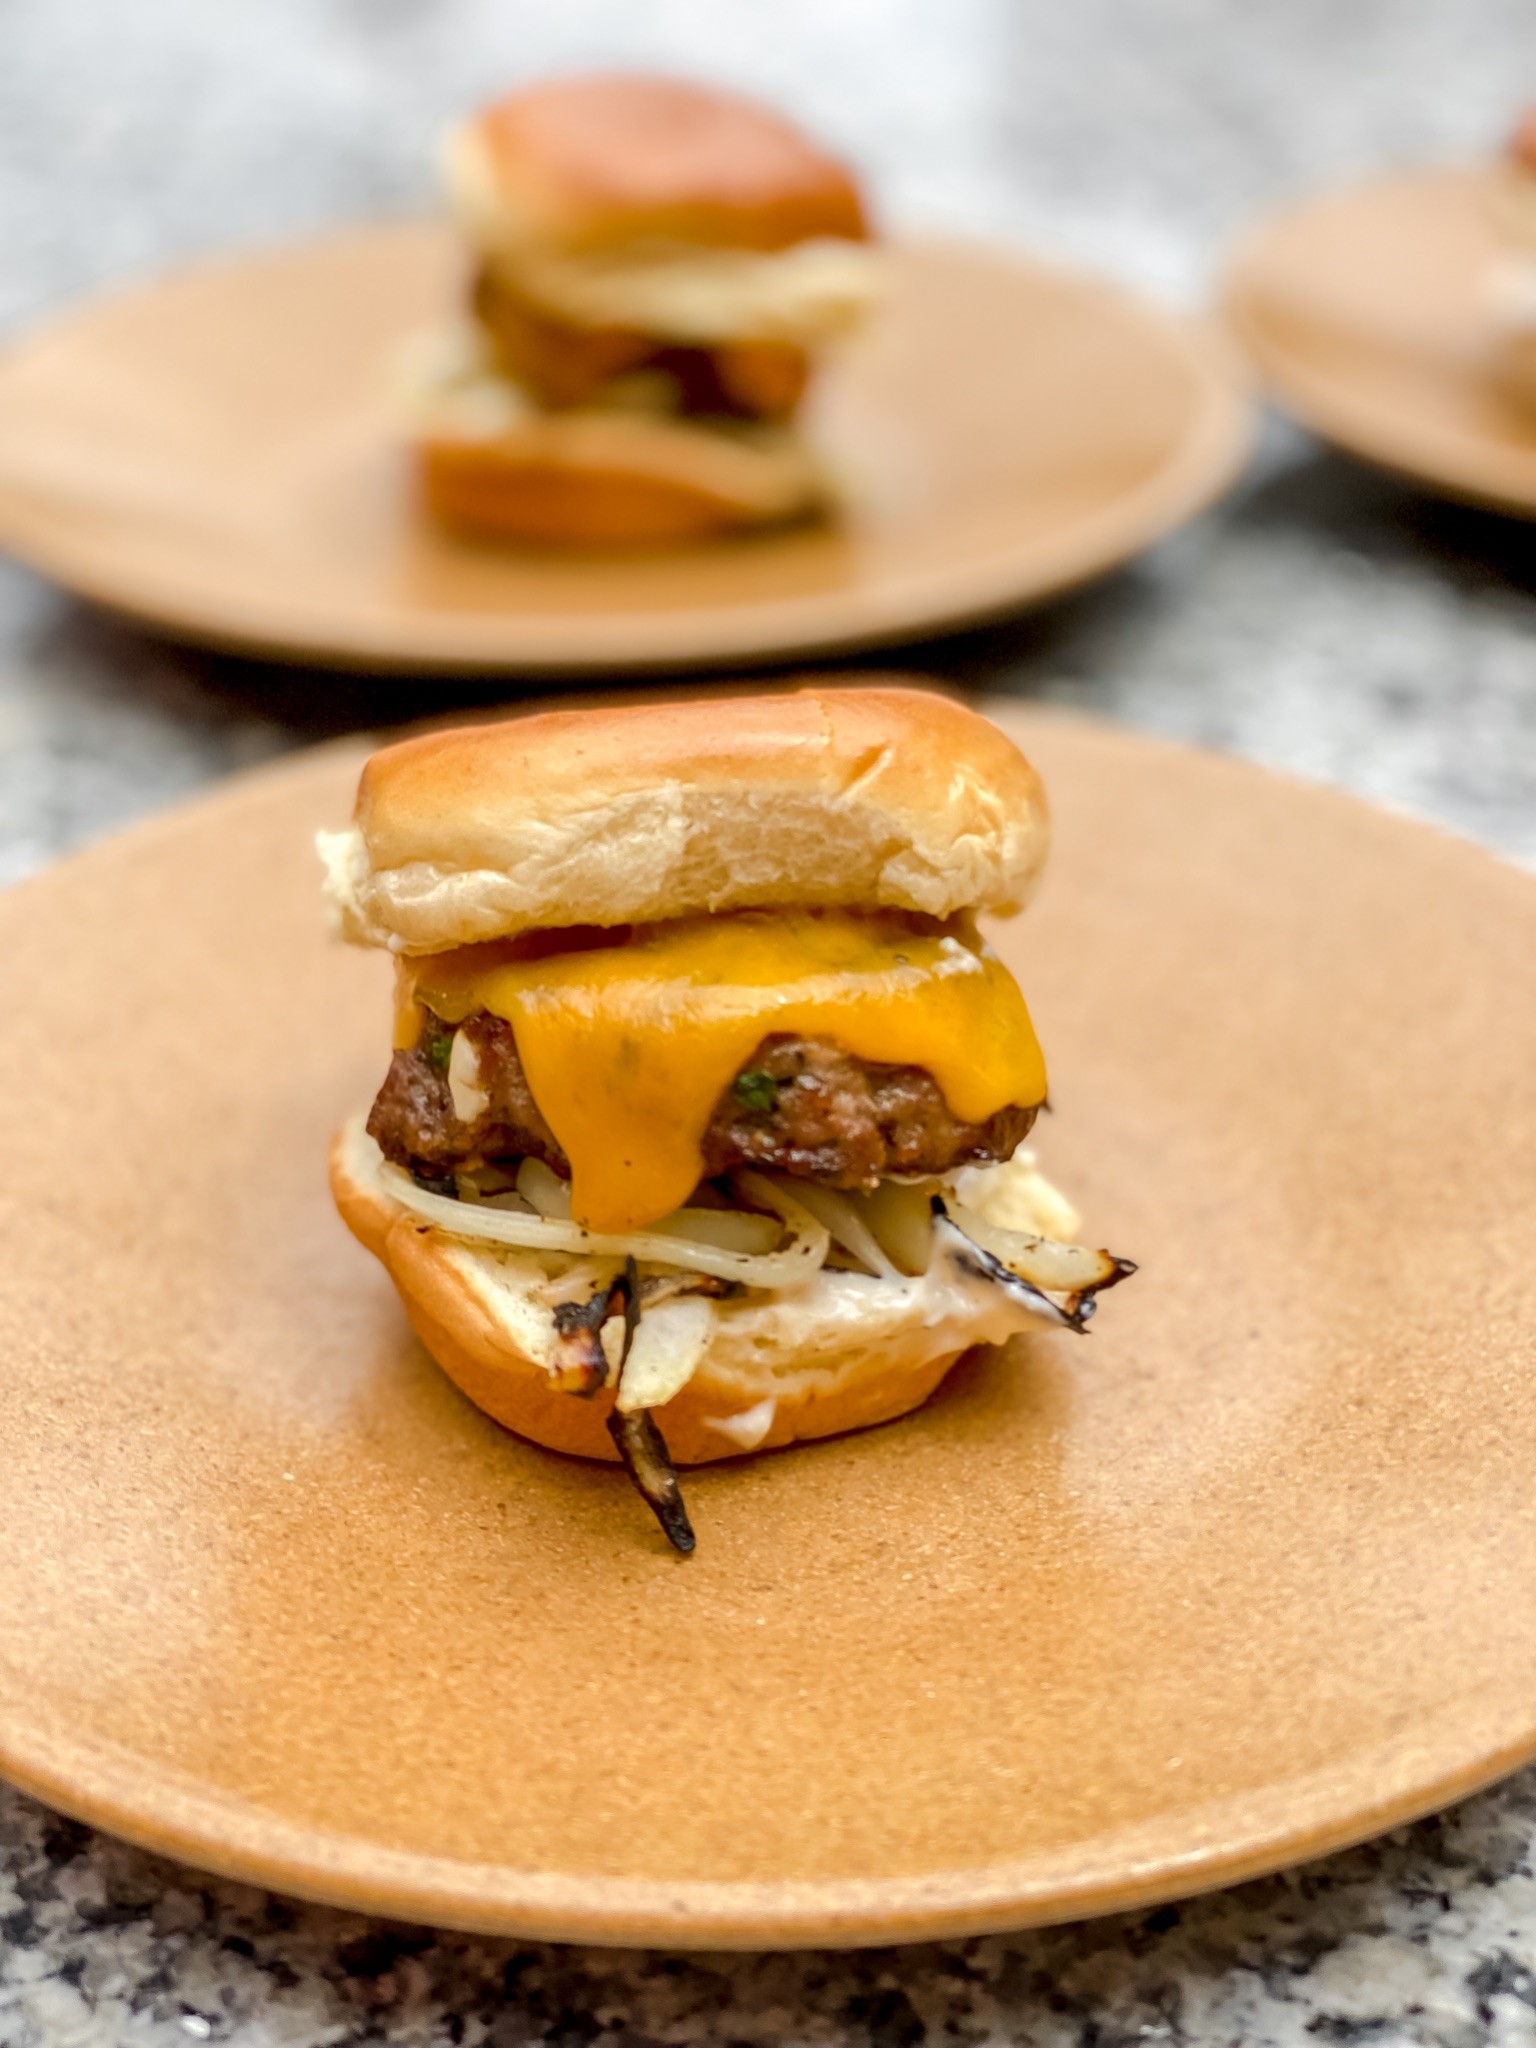 Sirloin Burgers with Bacon, Cheddar Cheese and Grilled Onions